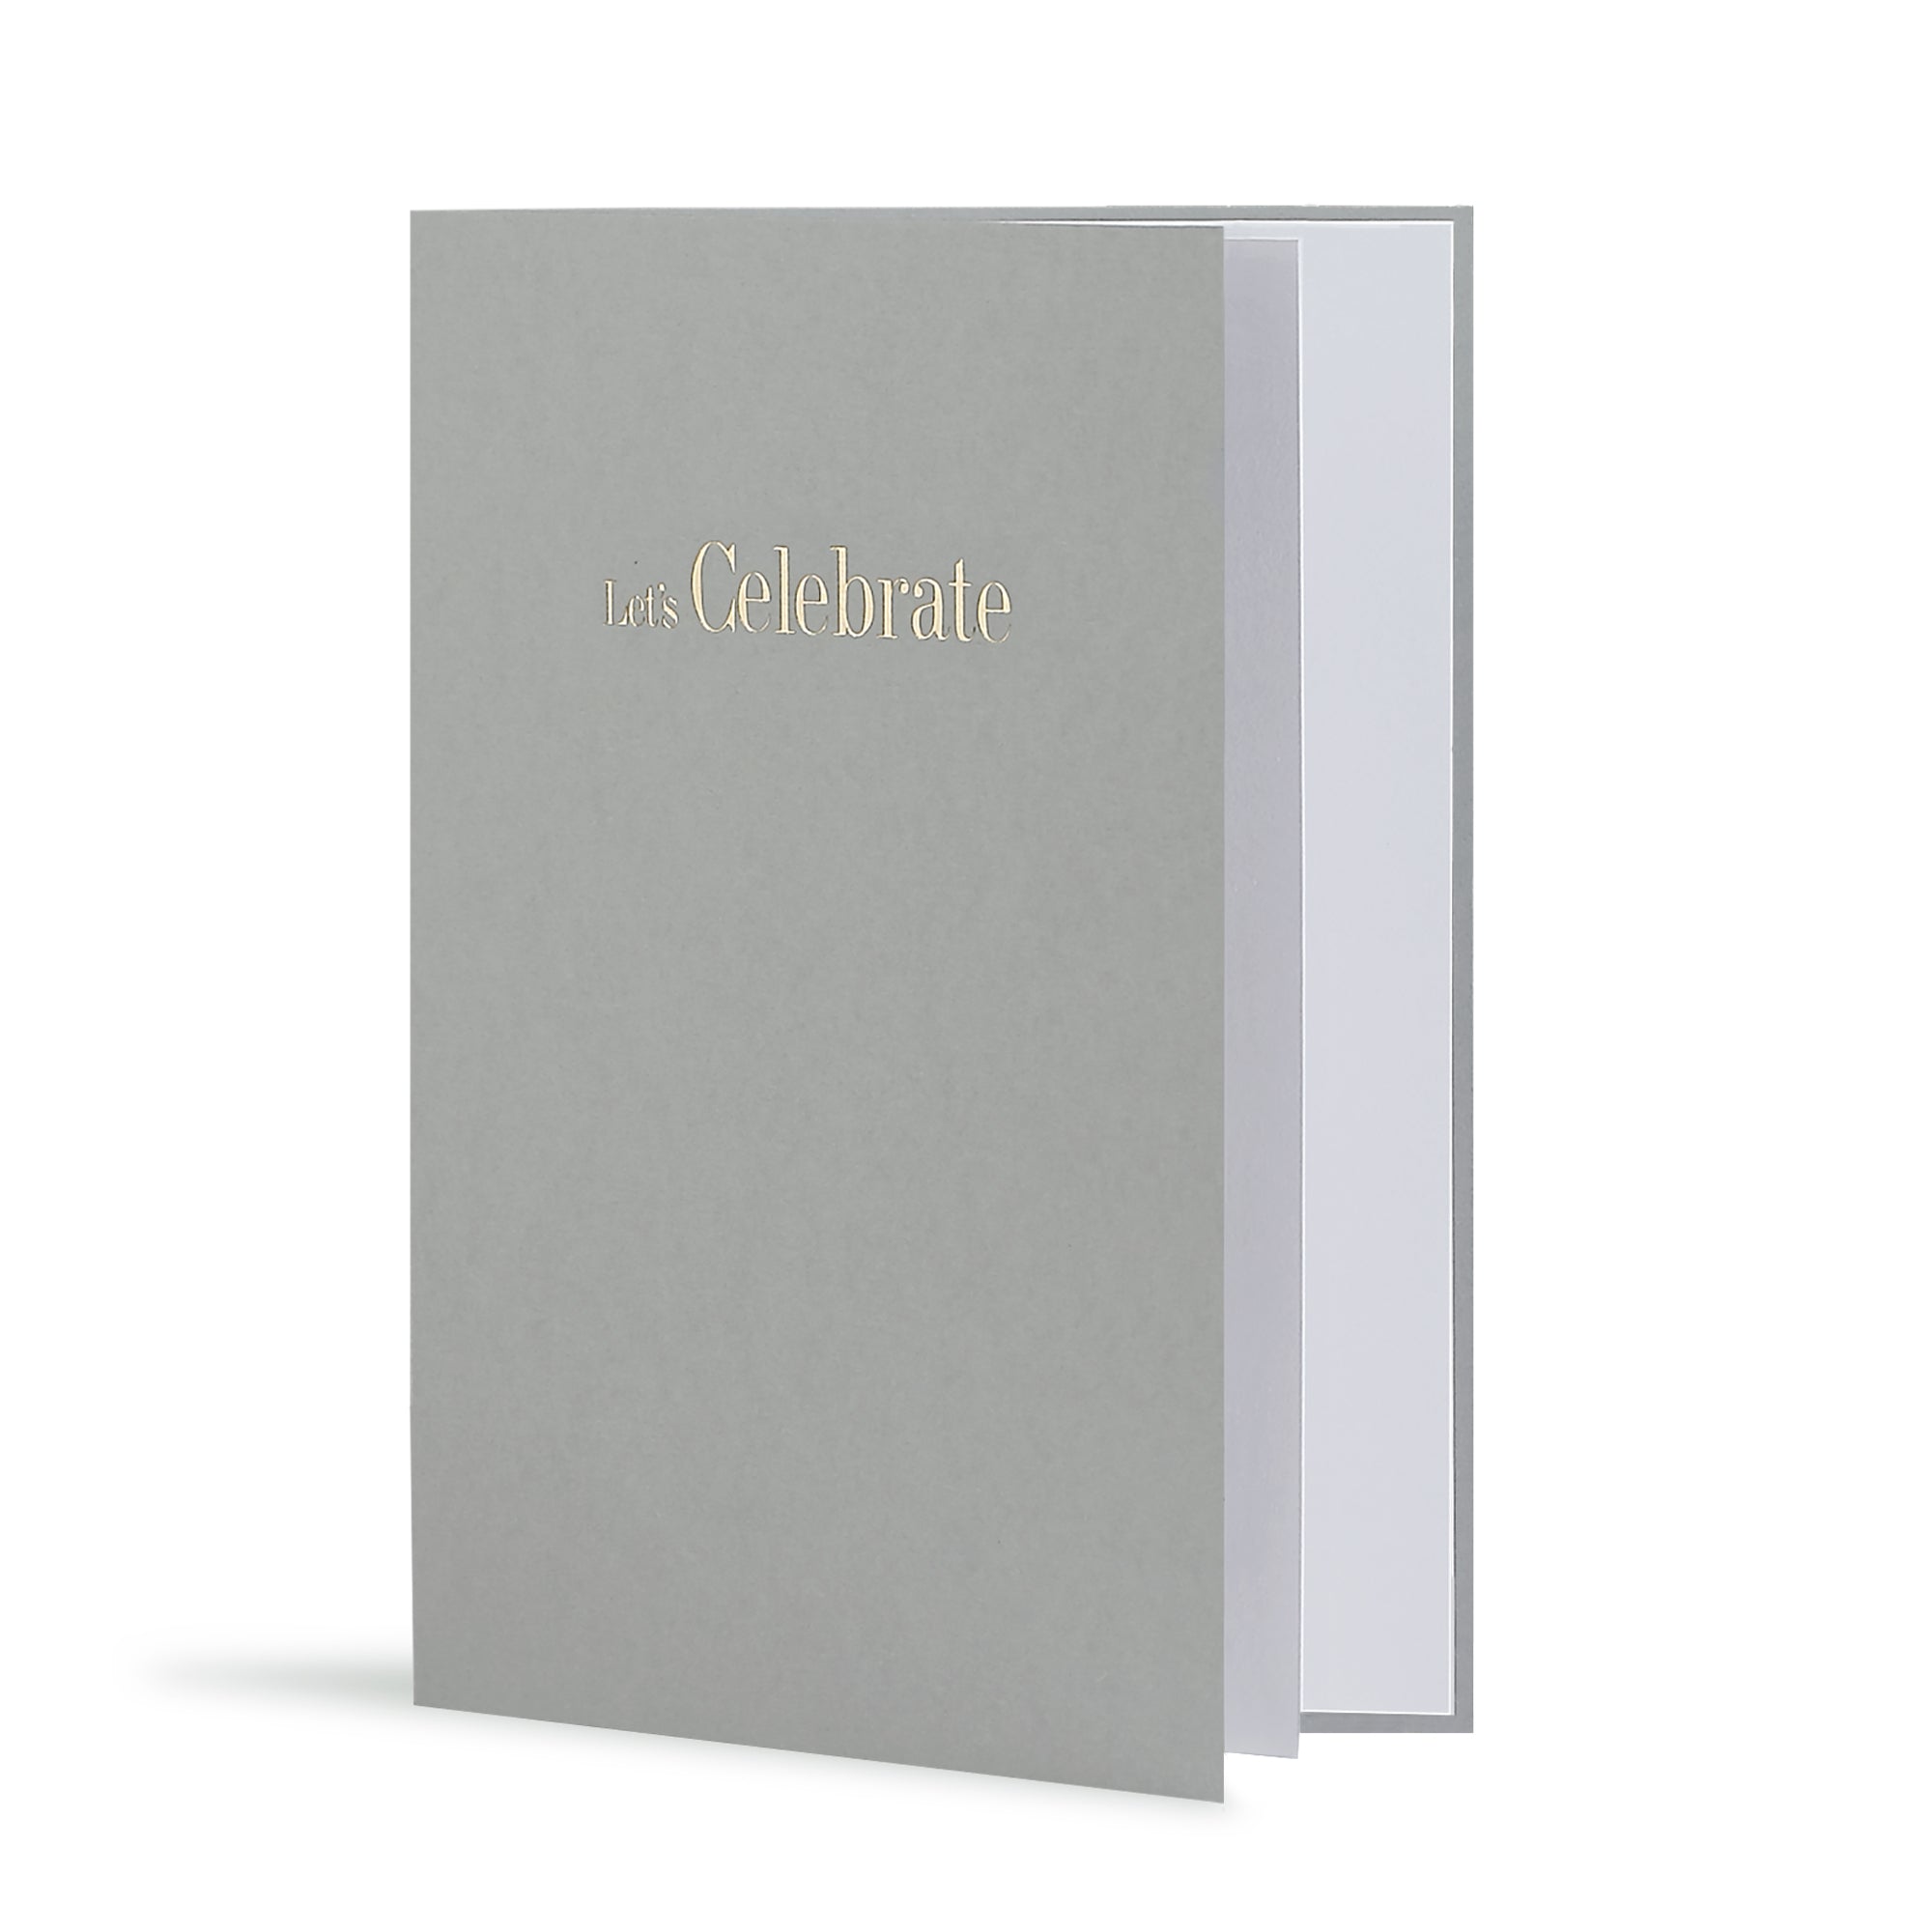 Let's Celebrate Greeting Card in Grey, Side